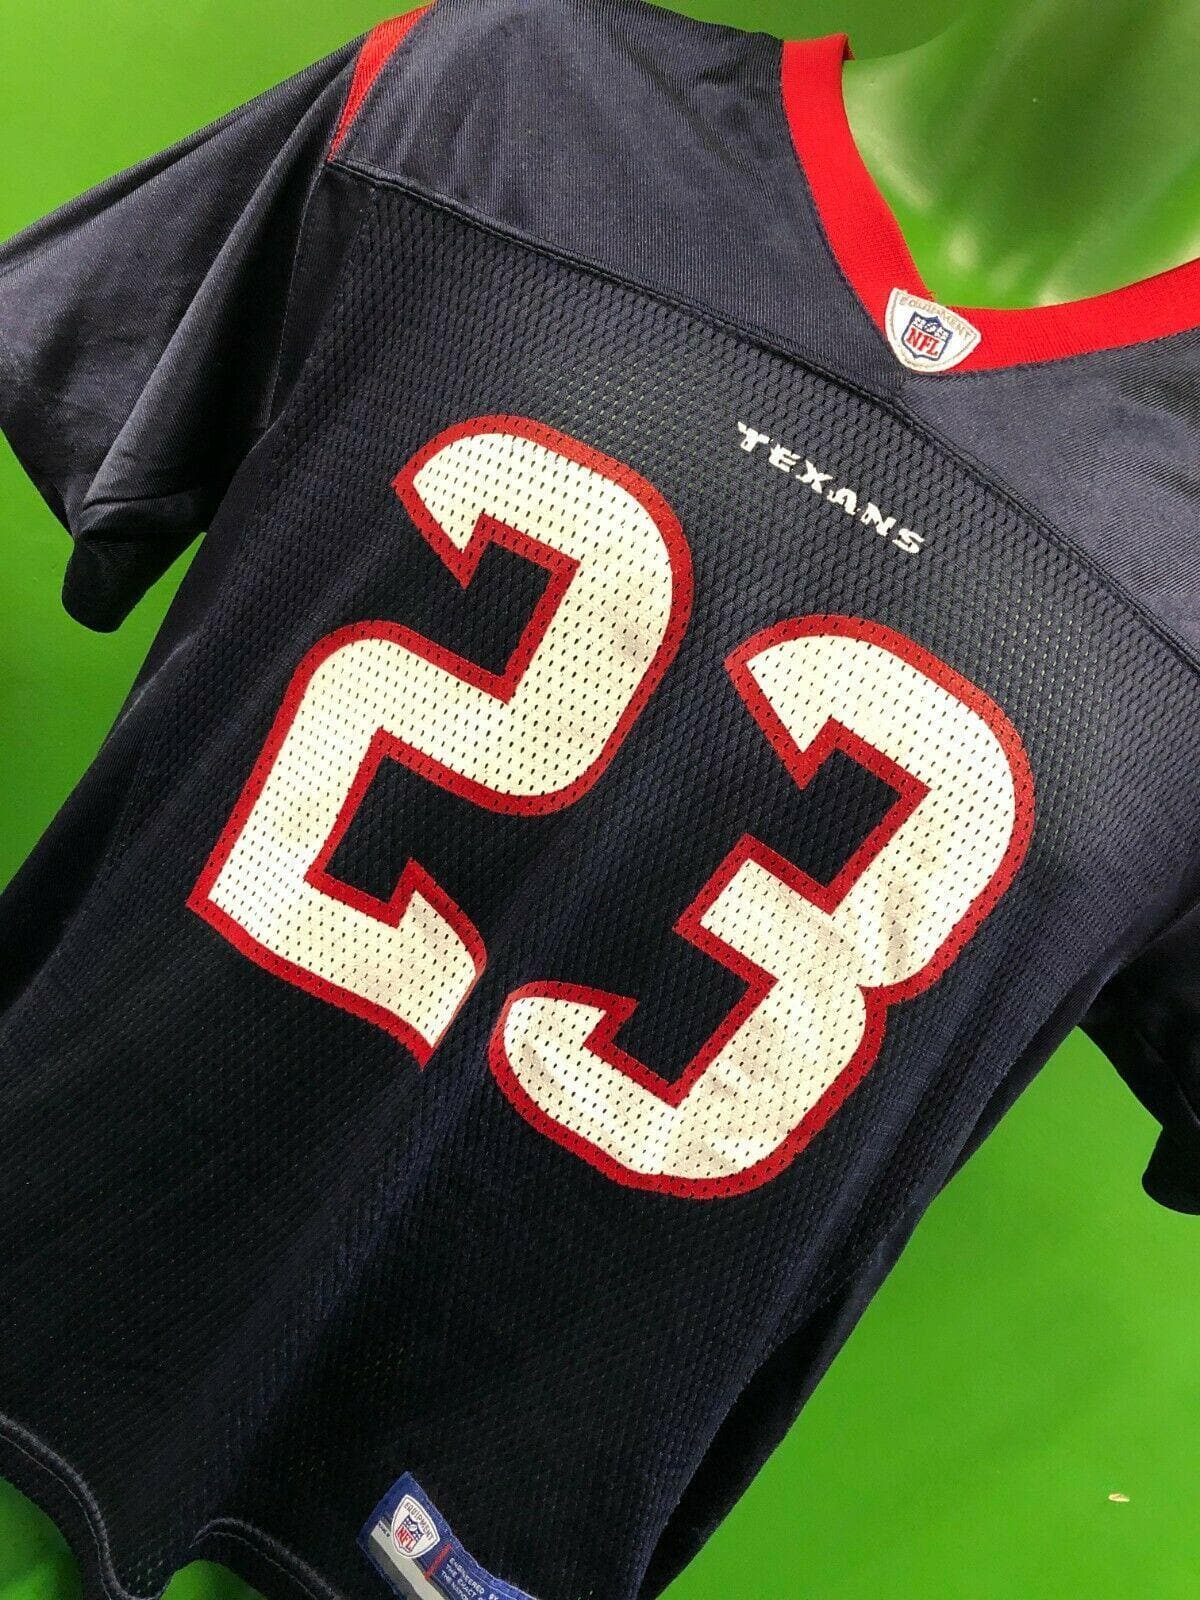 NFL Houston Texans Arian Foster #23 Reebok Jersey Youth Large 14-16